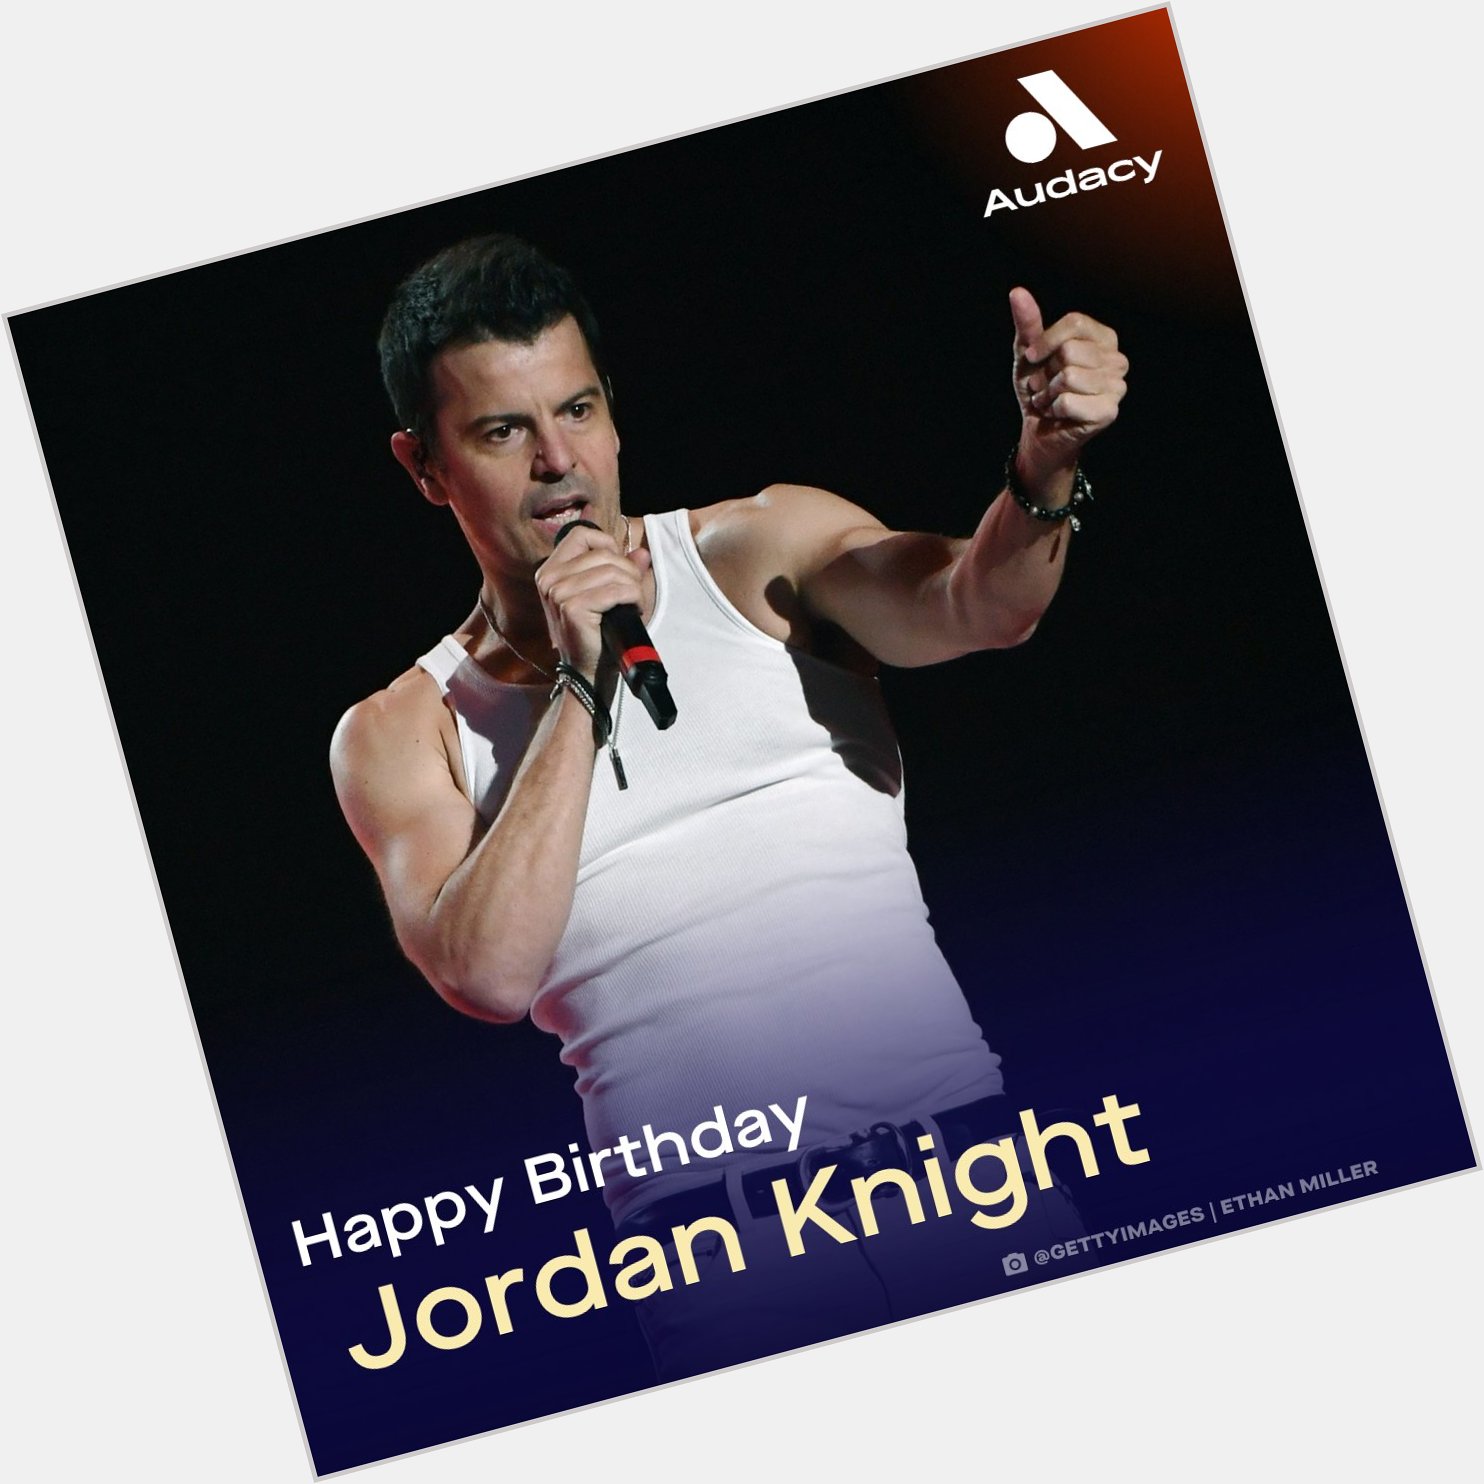 Happy birthday to Jordan Knight! Have you ever seen live before? 